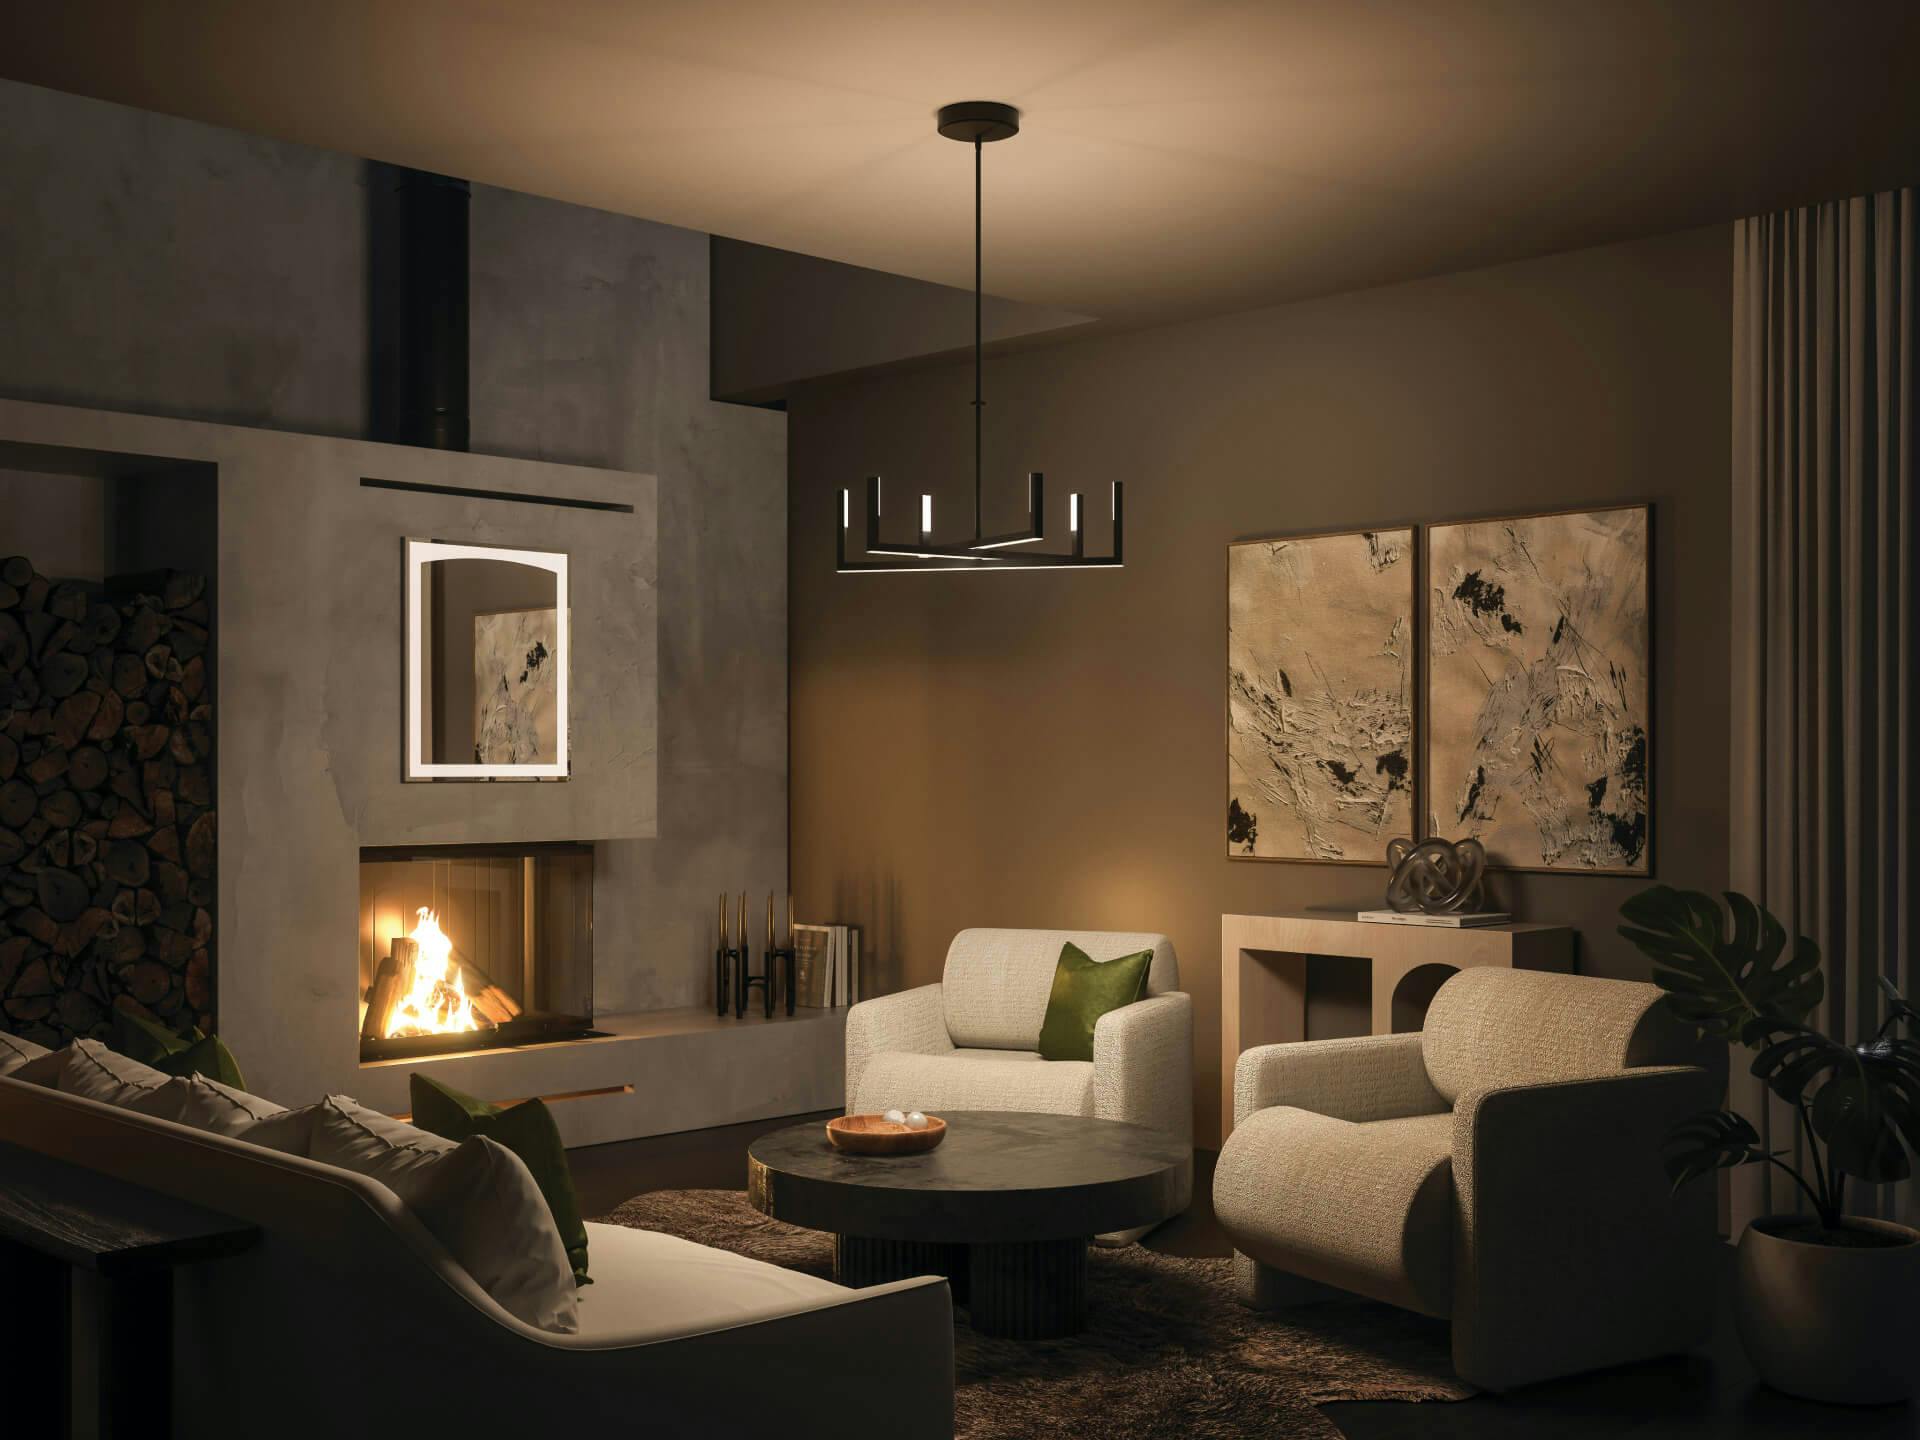 Living room at night with a lit fireplace and featuring a priam chandelier in black finish.